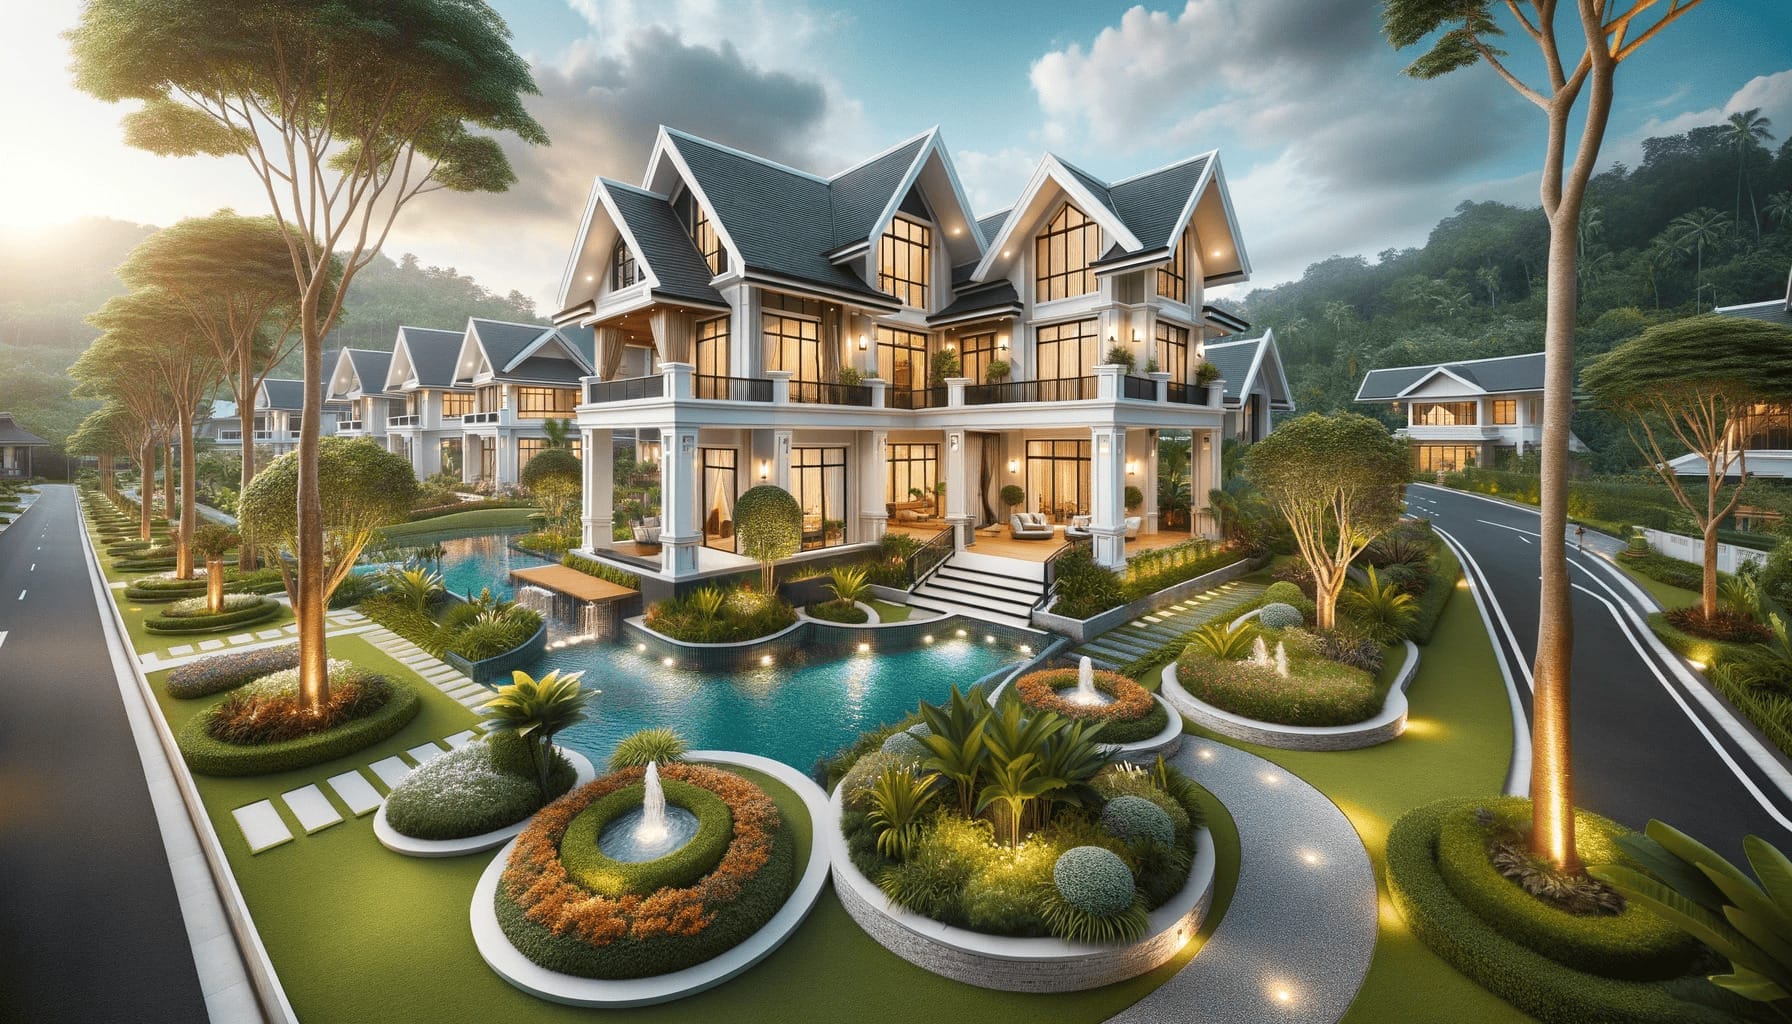 DALL·E 2023 10 19 15.49.08 Photo of a beautiful newly constructed home in Malaysia with a garden in the foreground